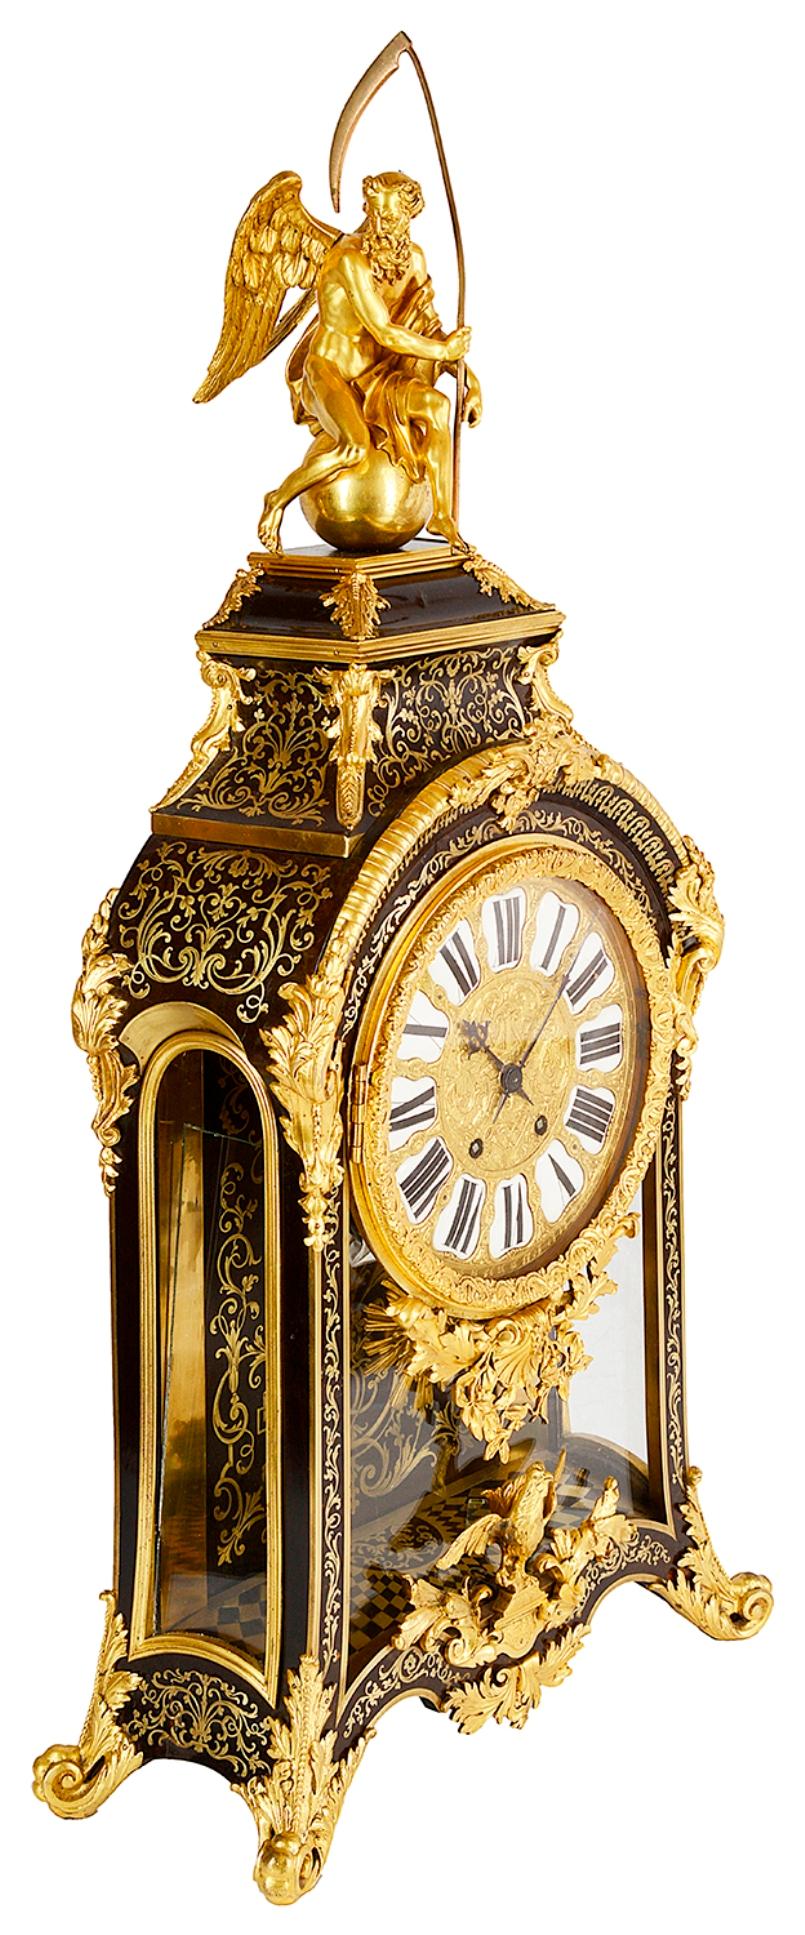 A very impressive 19th century French Boulle inlaid mantel clock. Having a gilded ormolu figure of father time to the top, beautiful brass inlaid decoration to the sides and front. The enamel roman numerals to the clock face, an eight day chiming